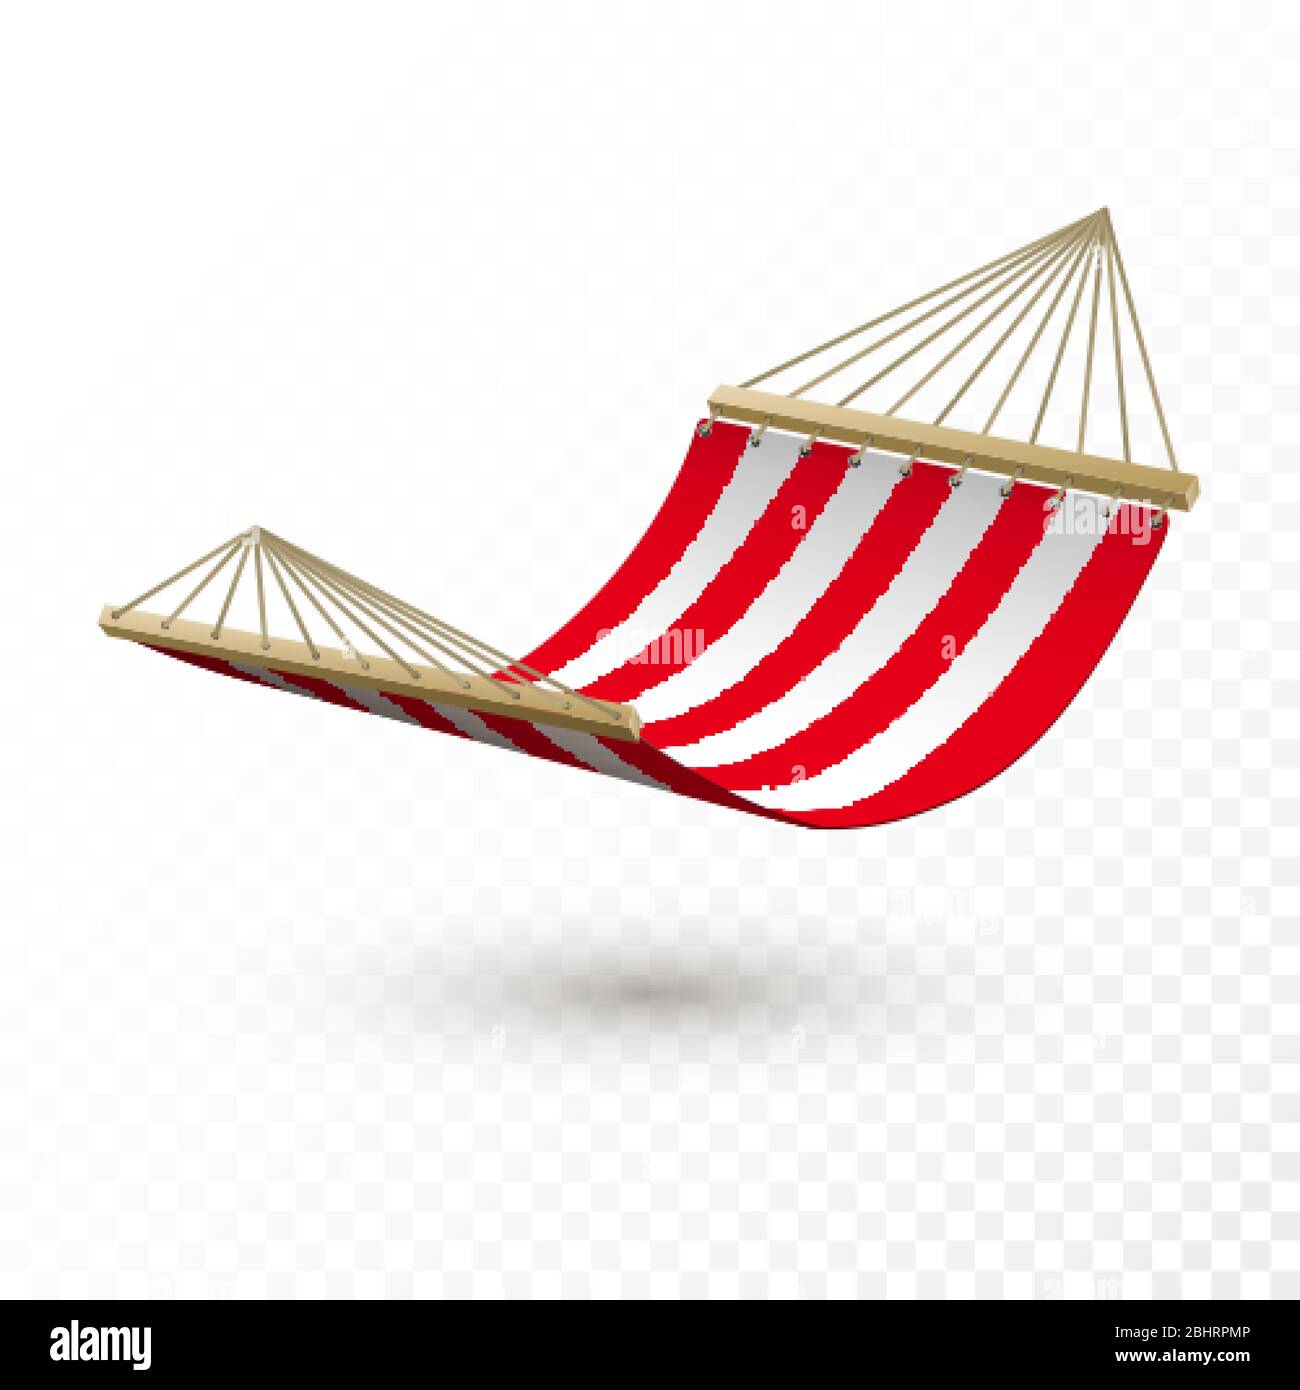 Hammock template. Red and white striped hammock. Camping or picnic relaxation. Tourism or vacation concept. Vector illustration isolated on transparen Stock Vector